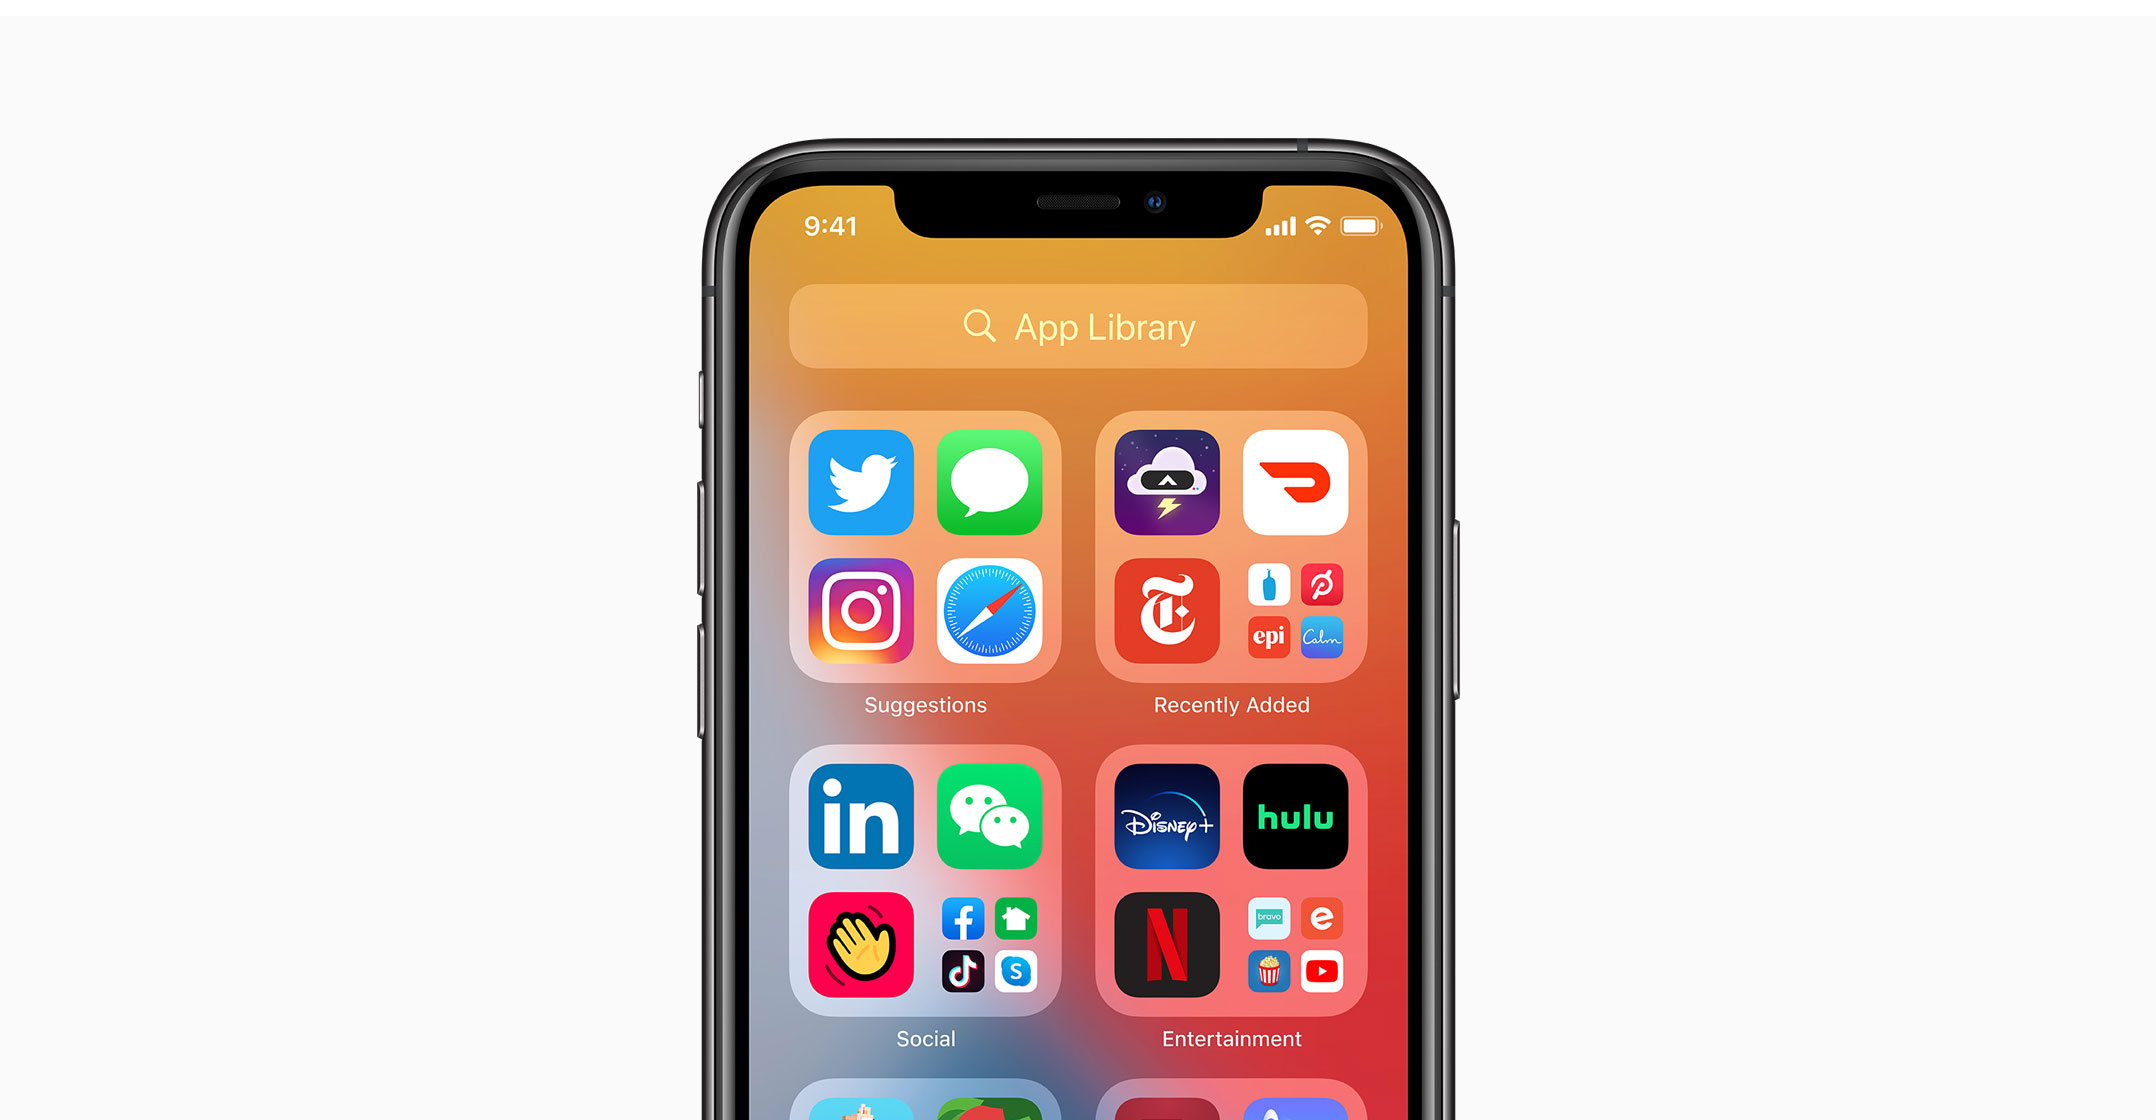 Best new features coming to the iPhone in iOS 14 - TechCentral